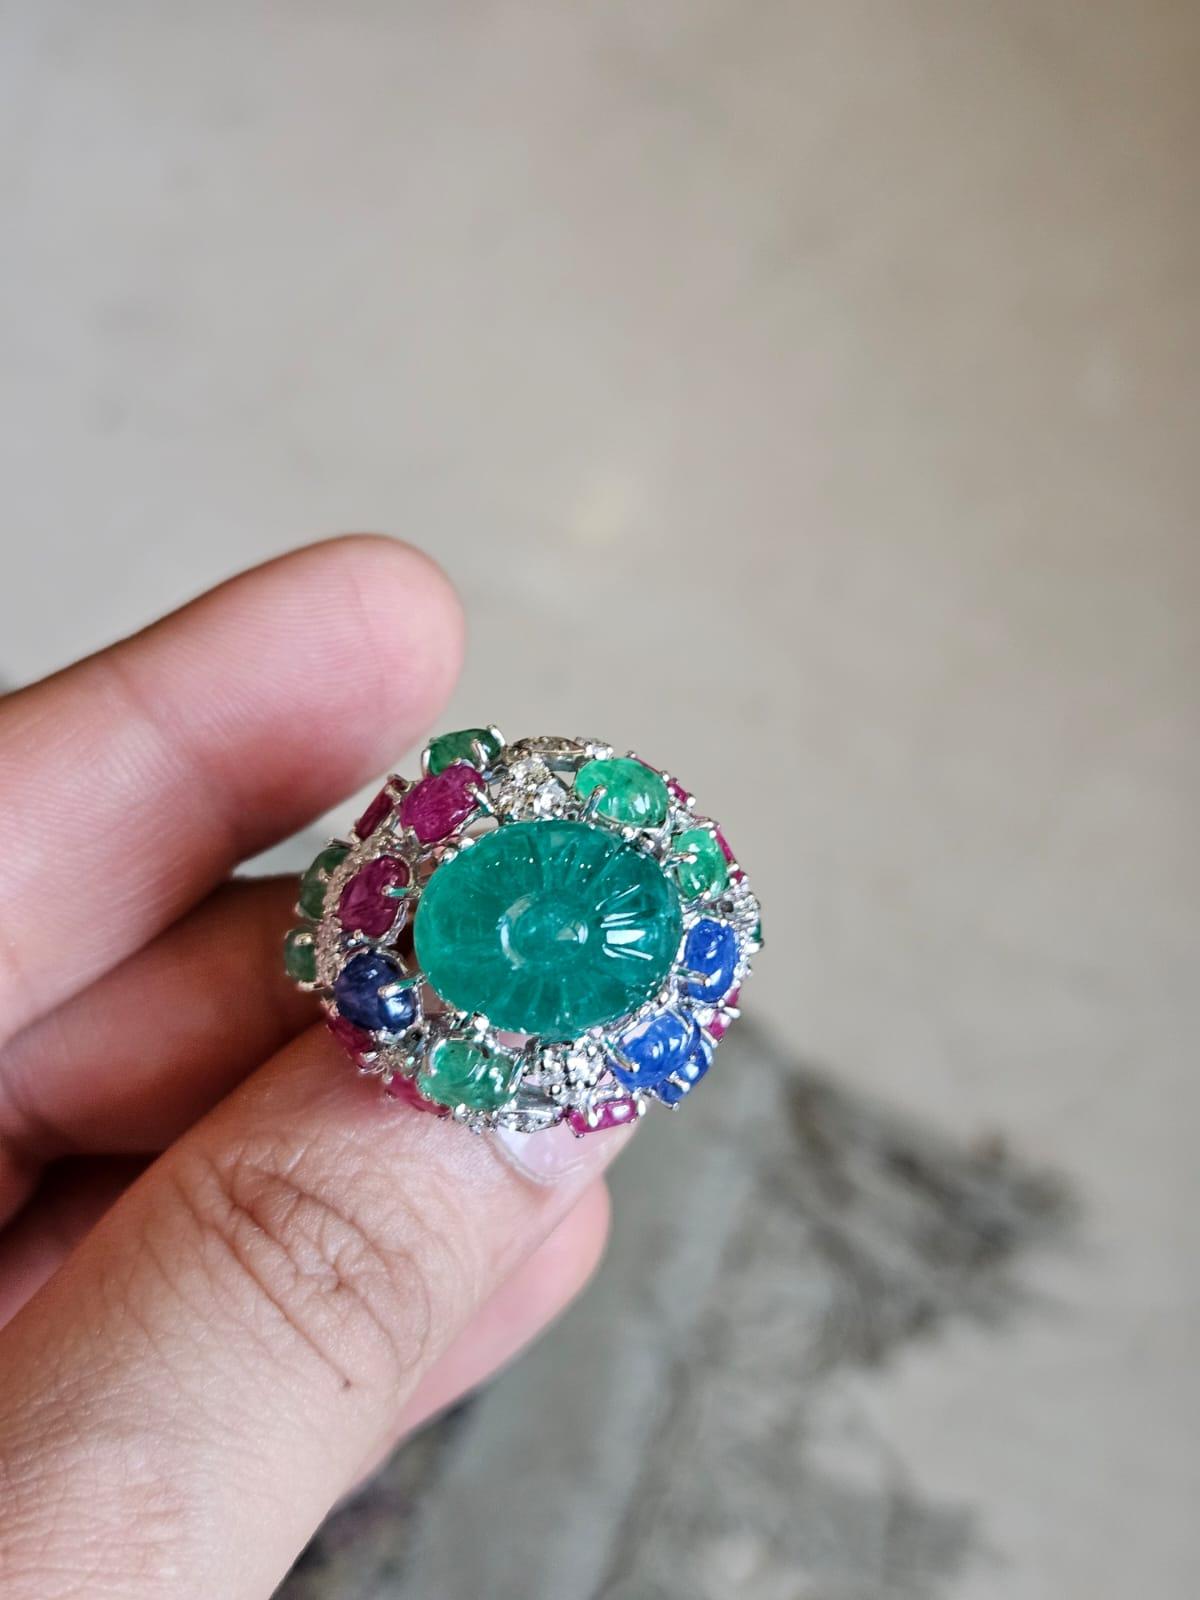 A very gorgeous and beautiful, Blue Sapphire, Emerald & Ruby Tutti Frutti Cocktail Ring set in 18K White Gold & Diamonds. The weight of the carved Emerald is 11.89 carats. The Emerald is completely natural, without any treatment and is of Zambian